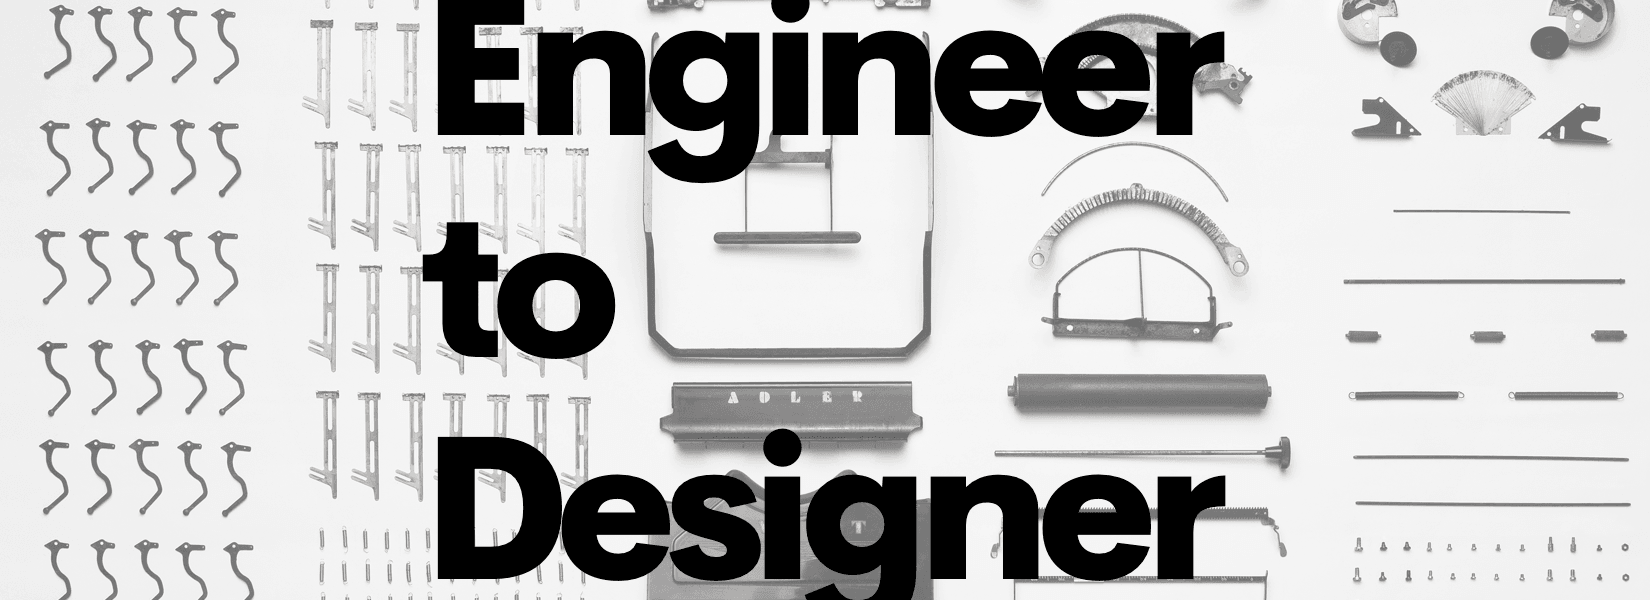 How a one-time engineer became an all-the-time designer